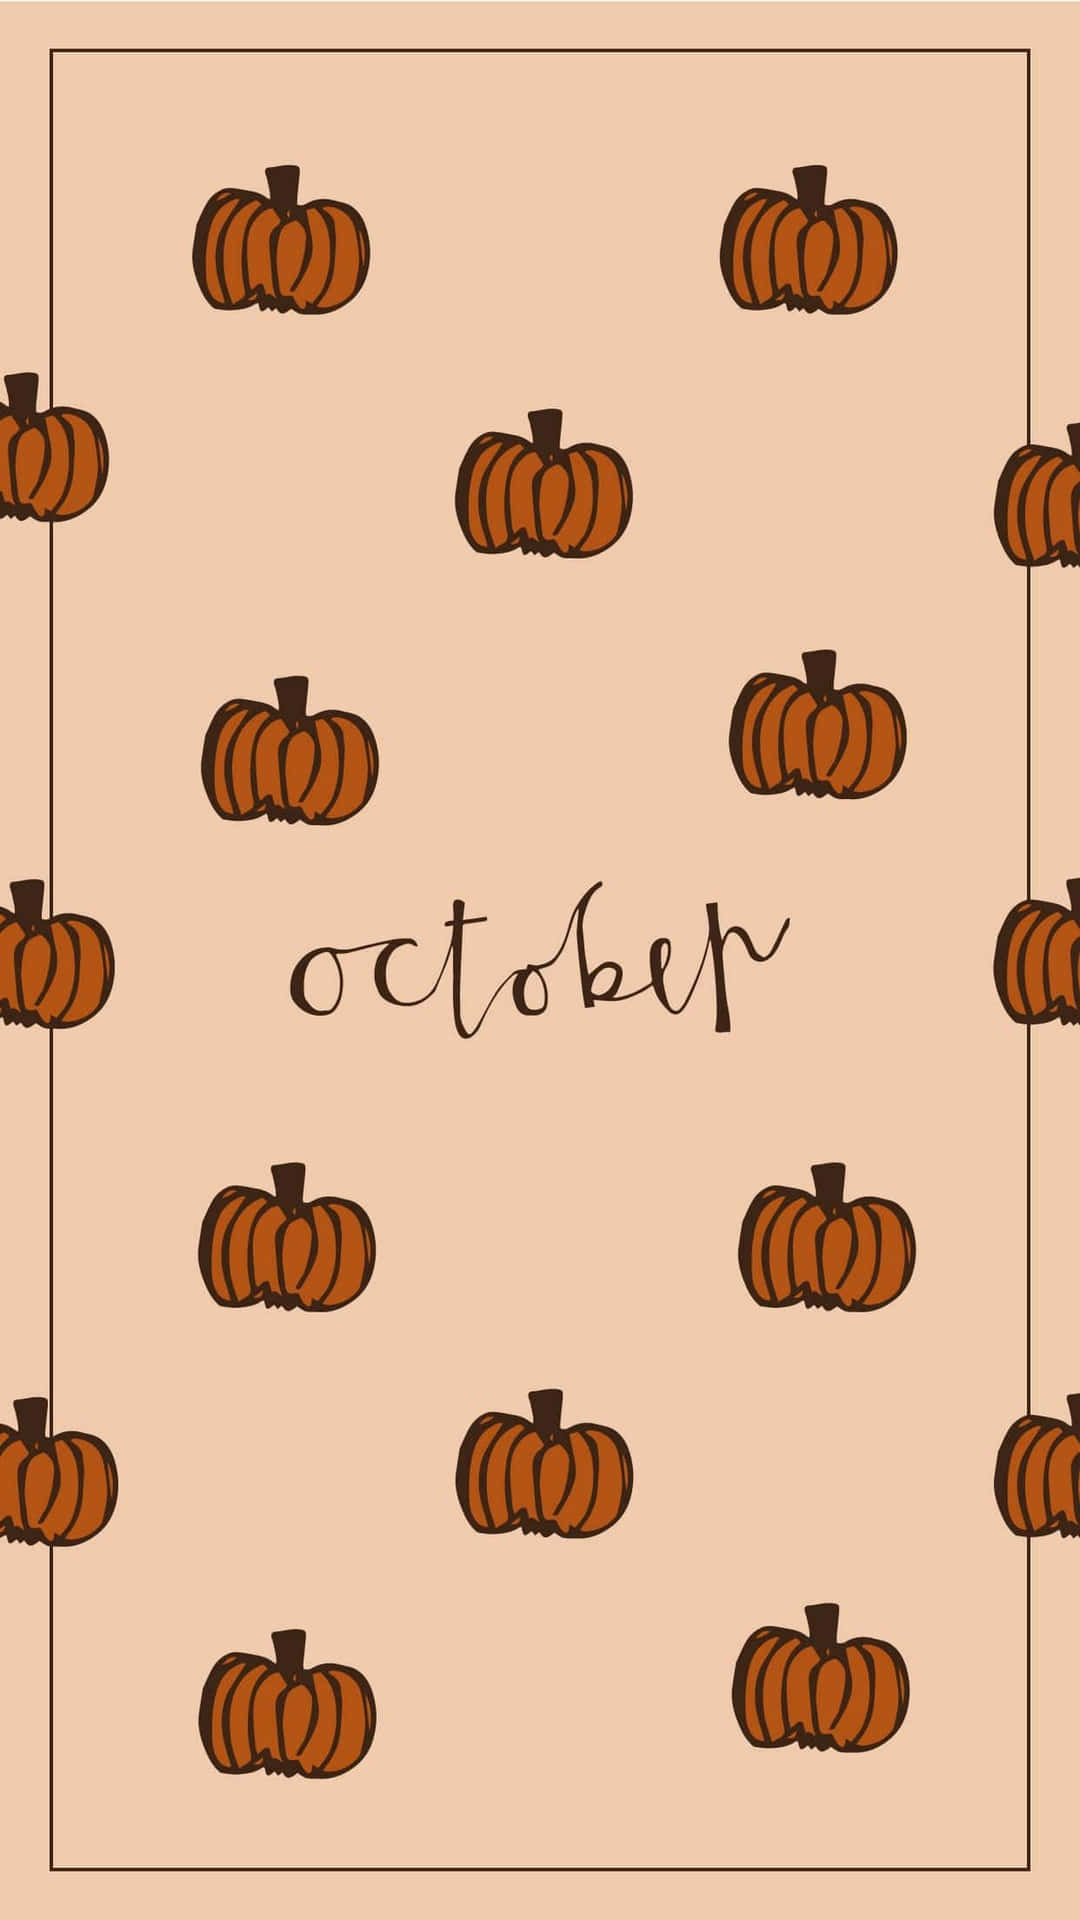 Get Ready for Autumn with this Seasonal October Iphone Wallpaper